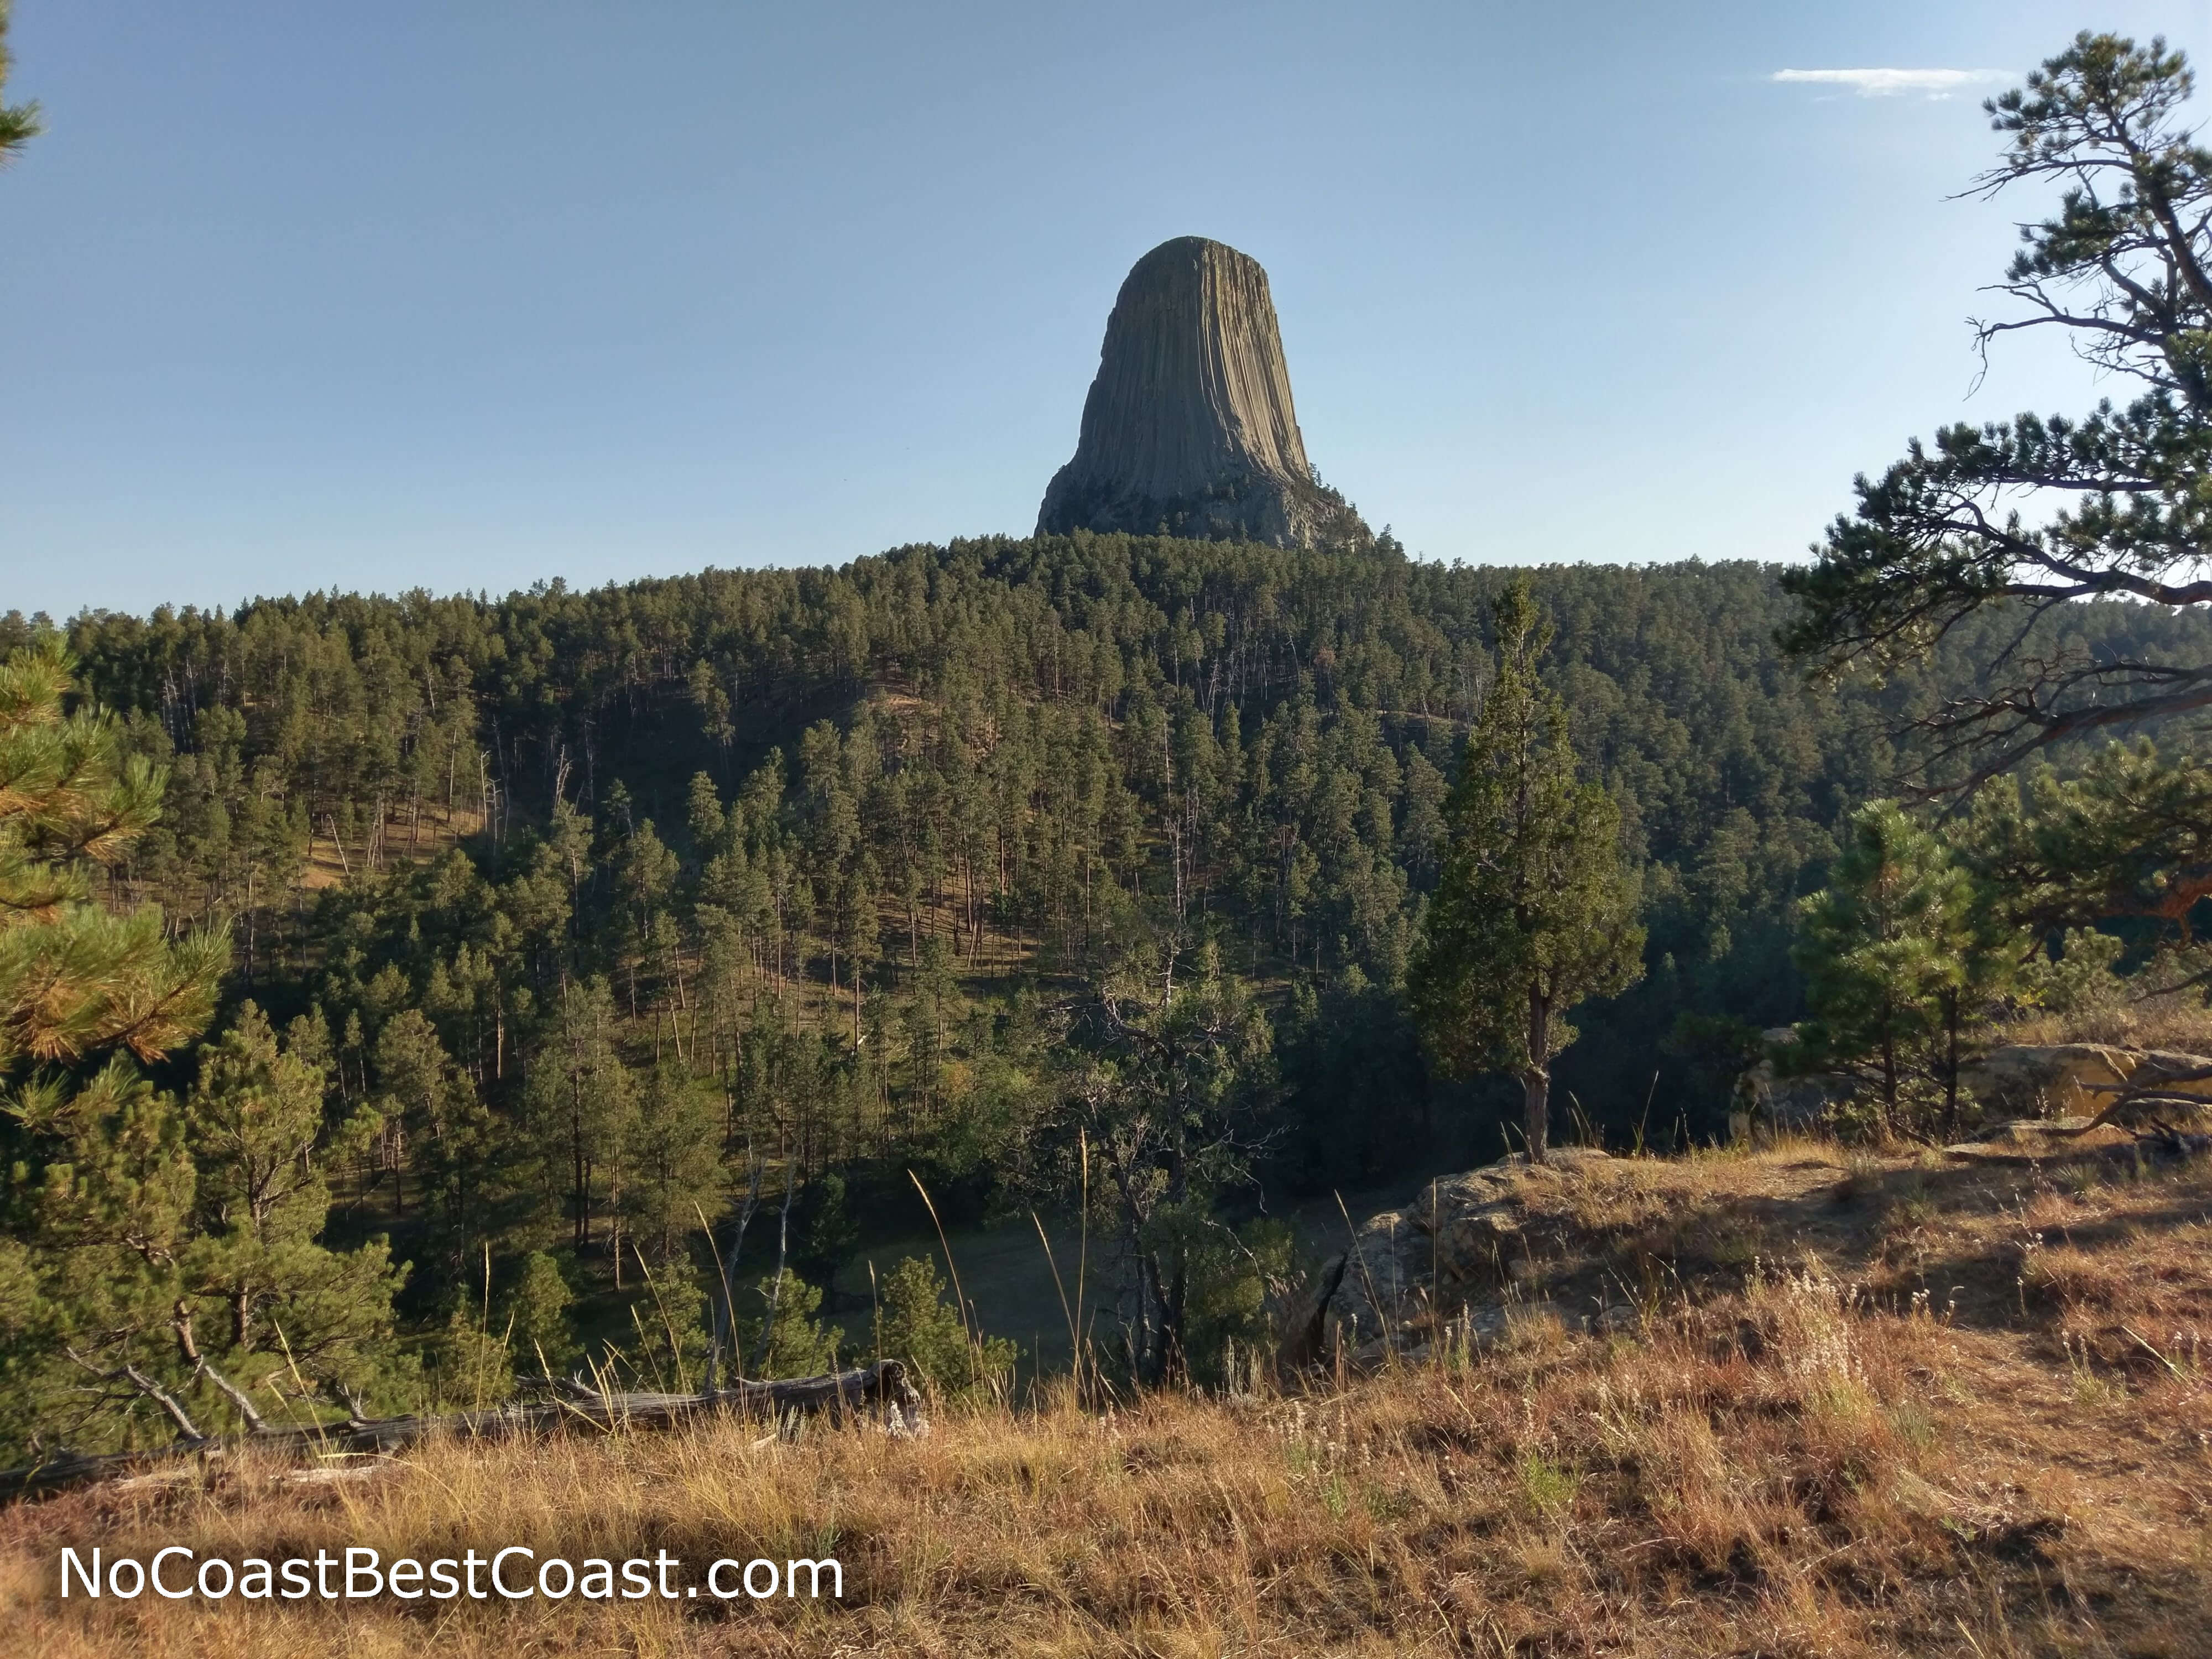 Devils Tower rises above the pine forest